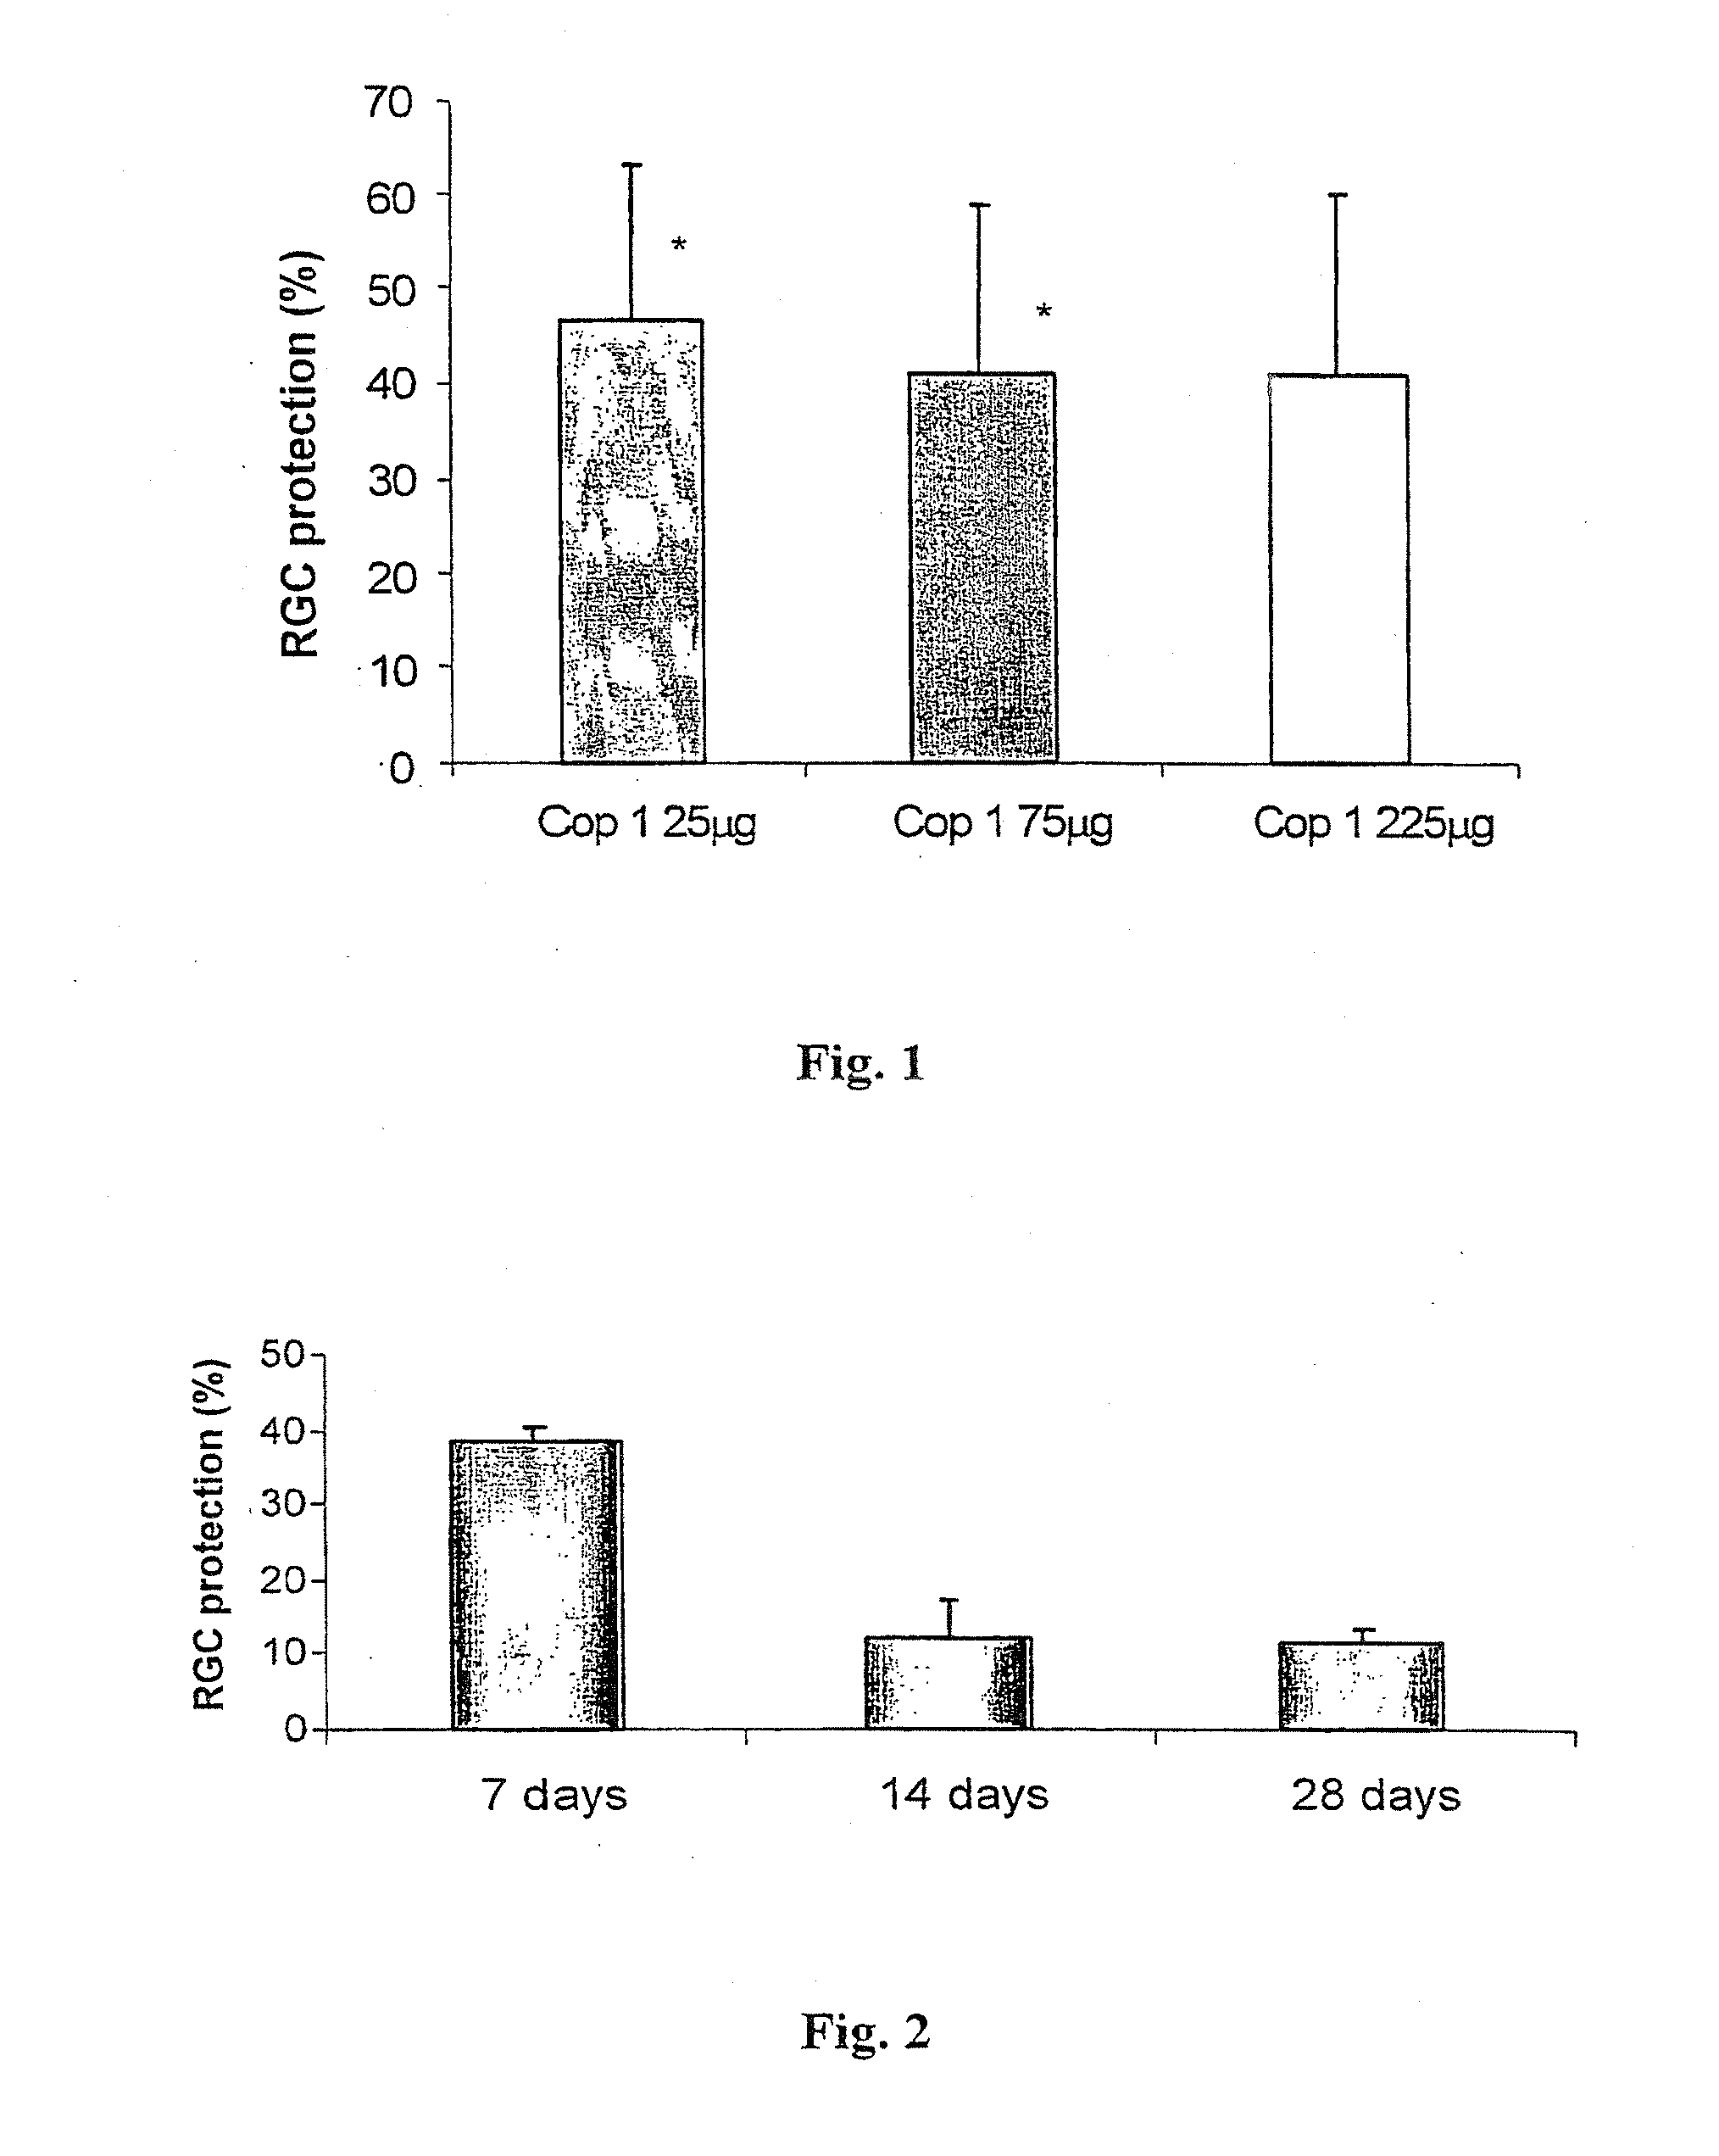 Vaccine and method for treatment of neurodegenerative diseases